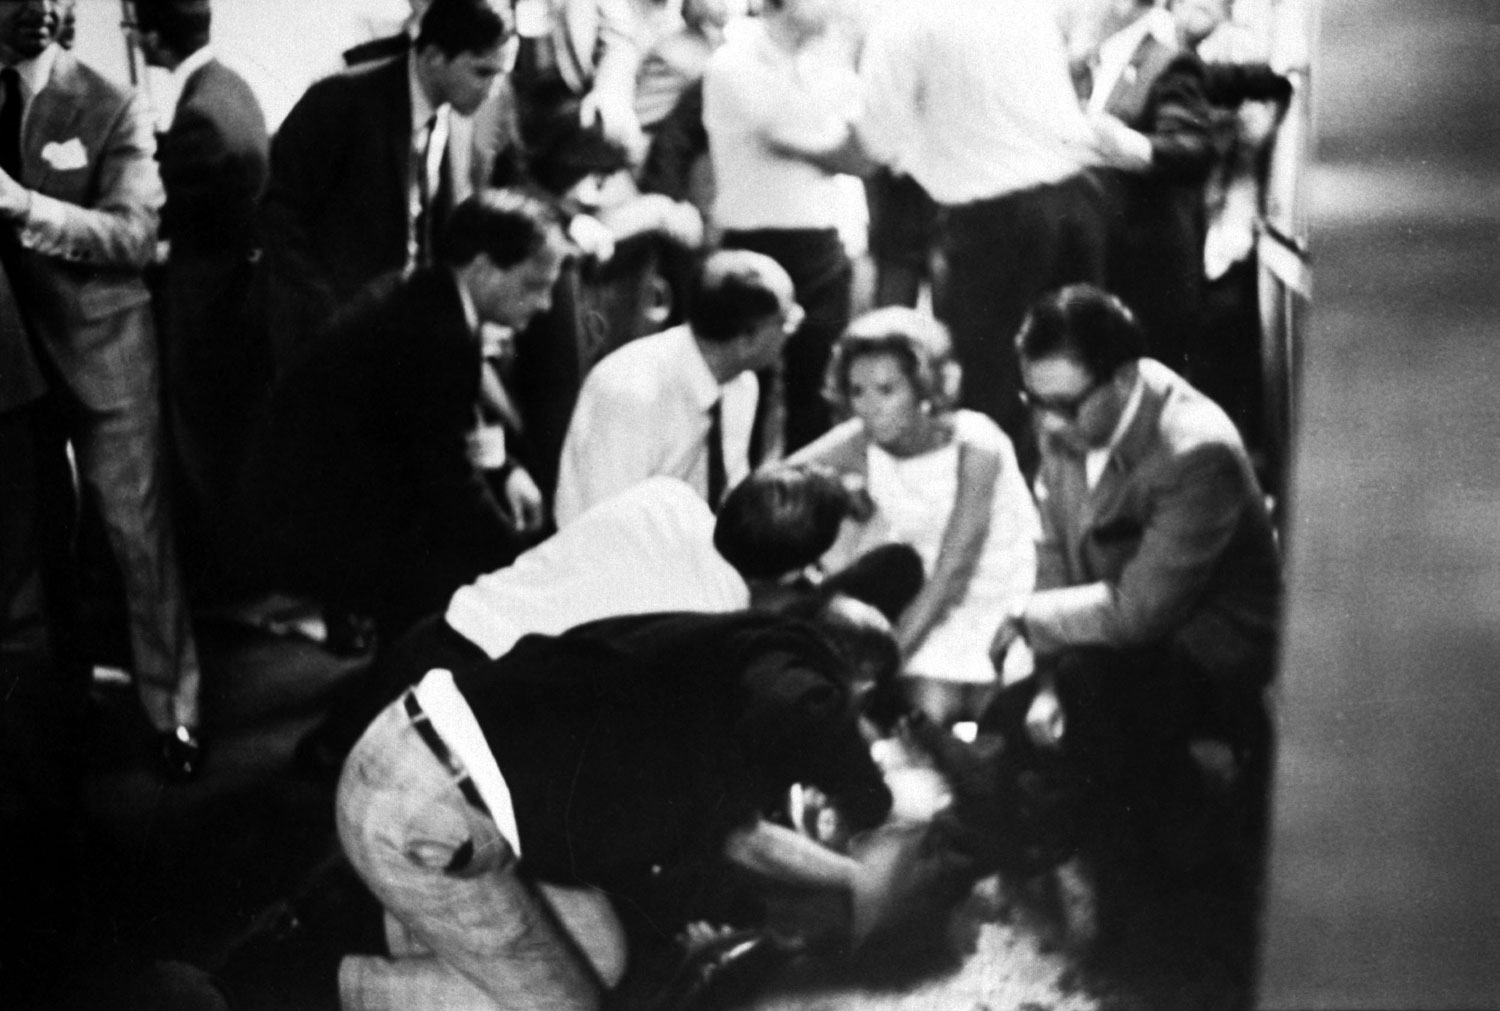 Mrs. Robert Kennedy and others surround a mortally wounded Robert Kennedy in the kitchen at the Ambassador Hotel, June 1968.